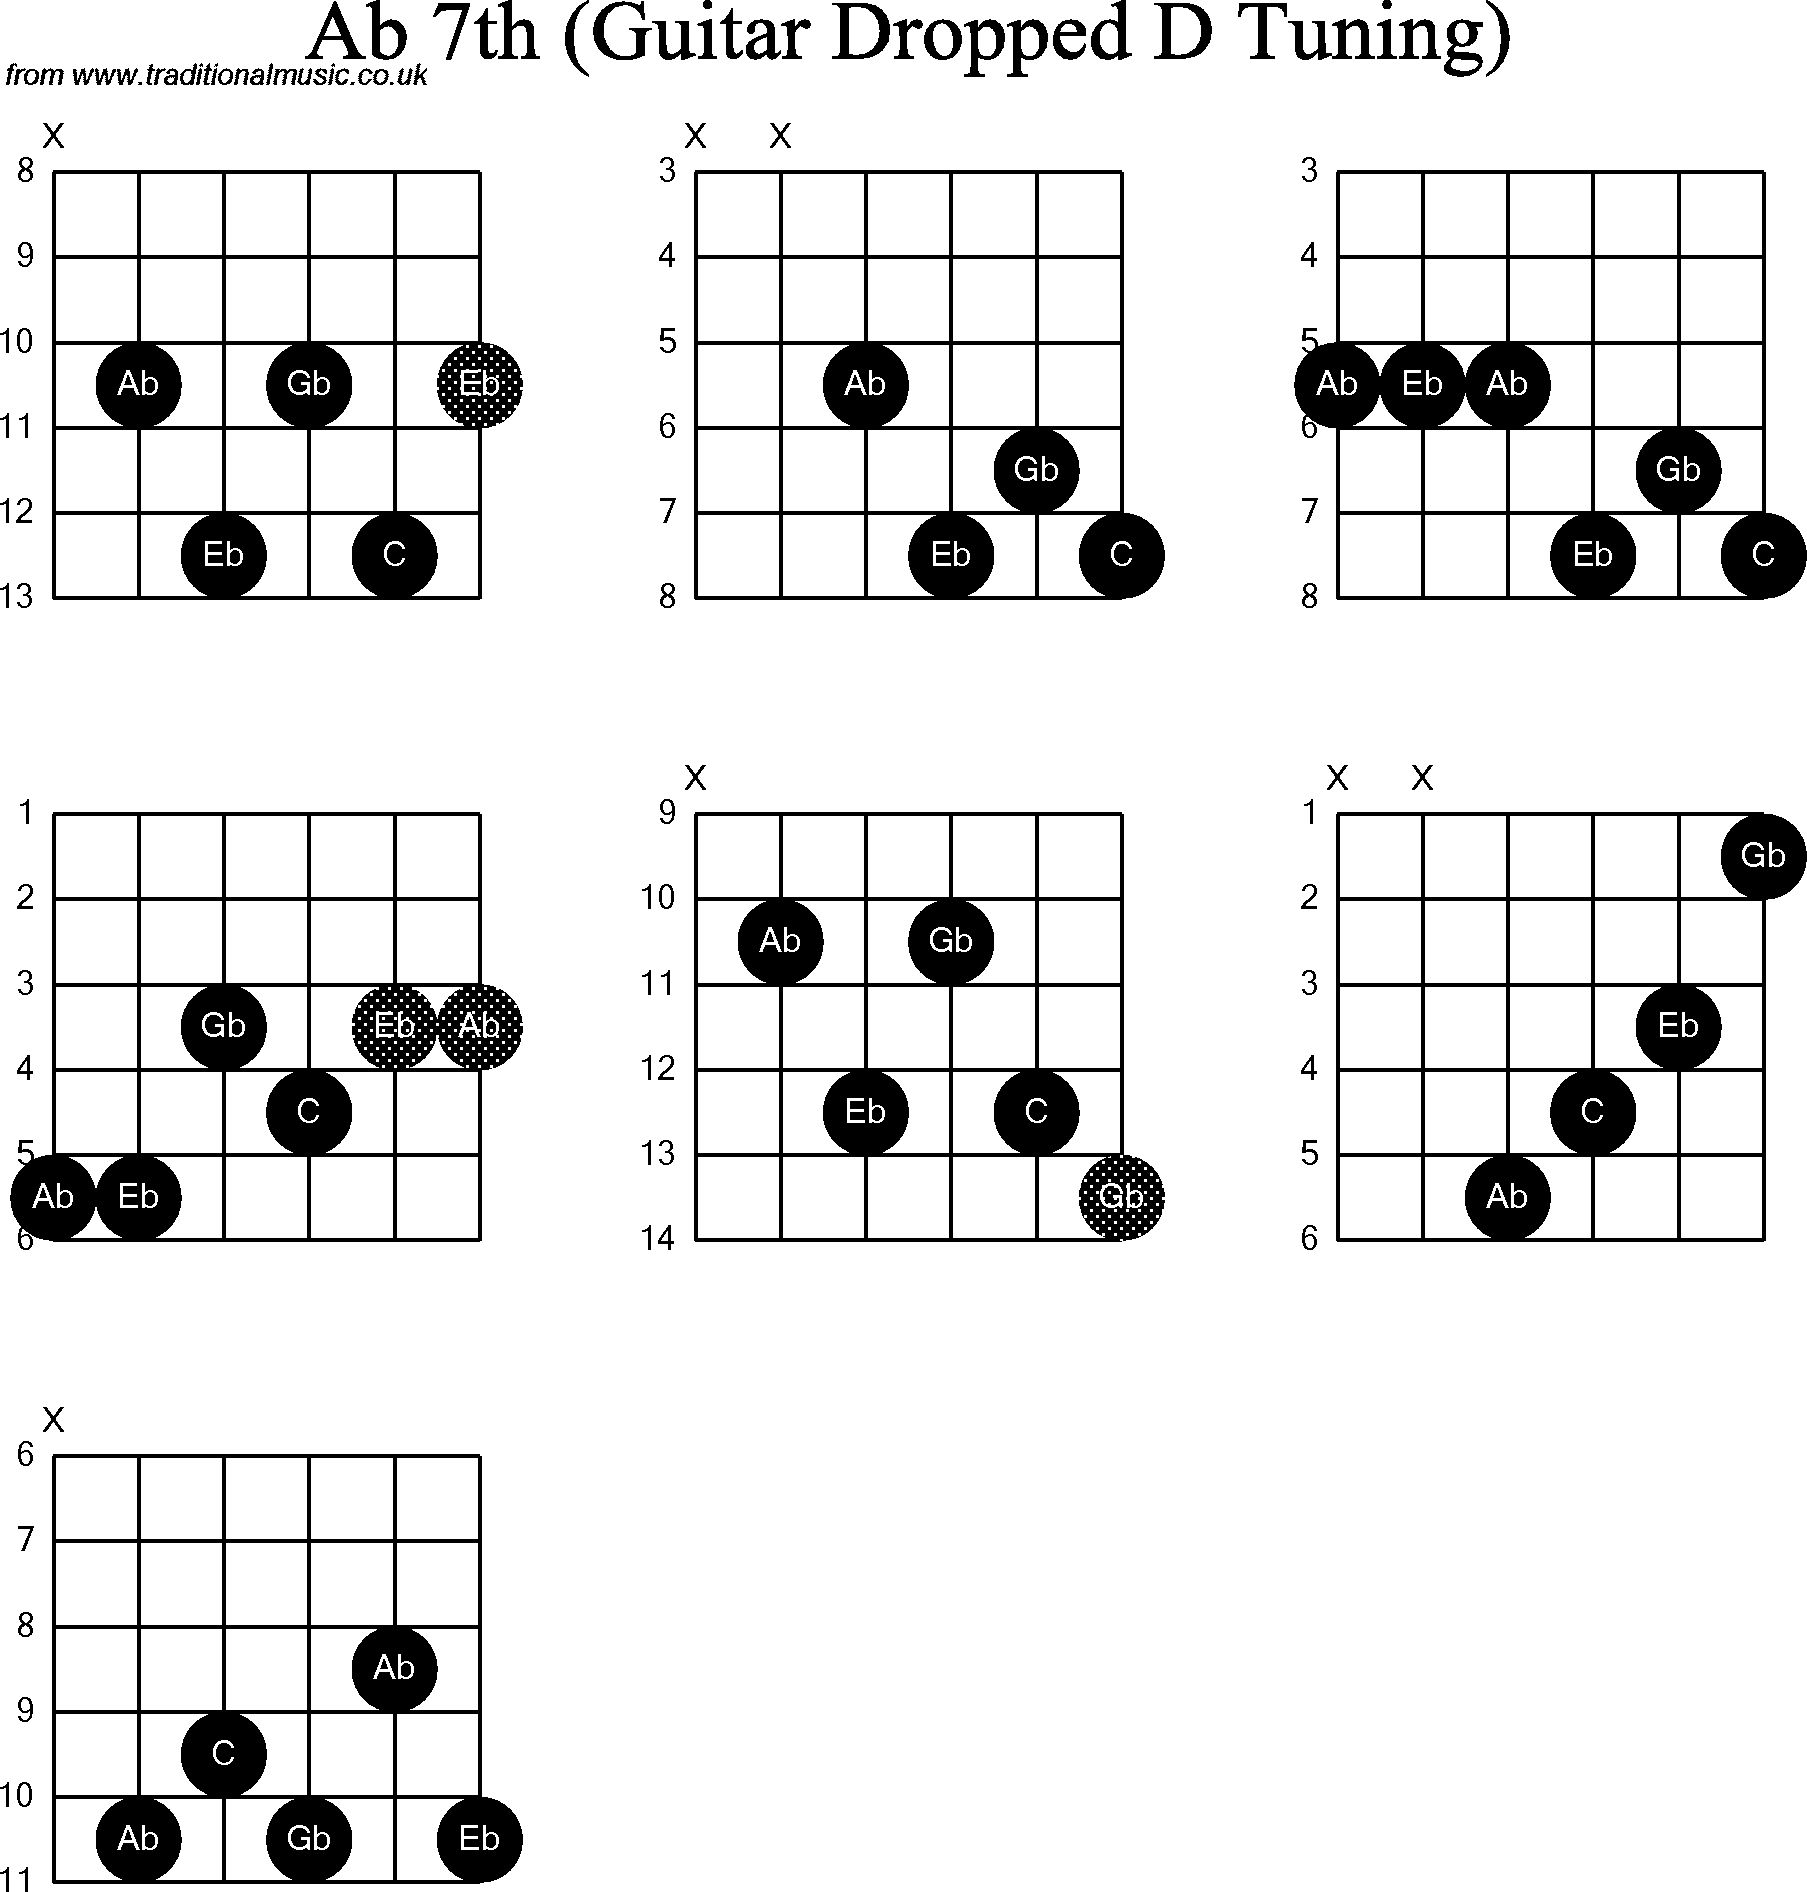 Chord diagrams for dropped D Guitar(DADGBE), Ab7th